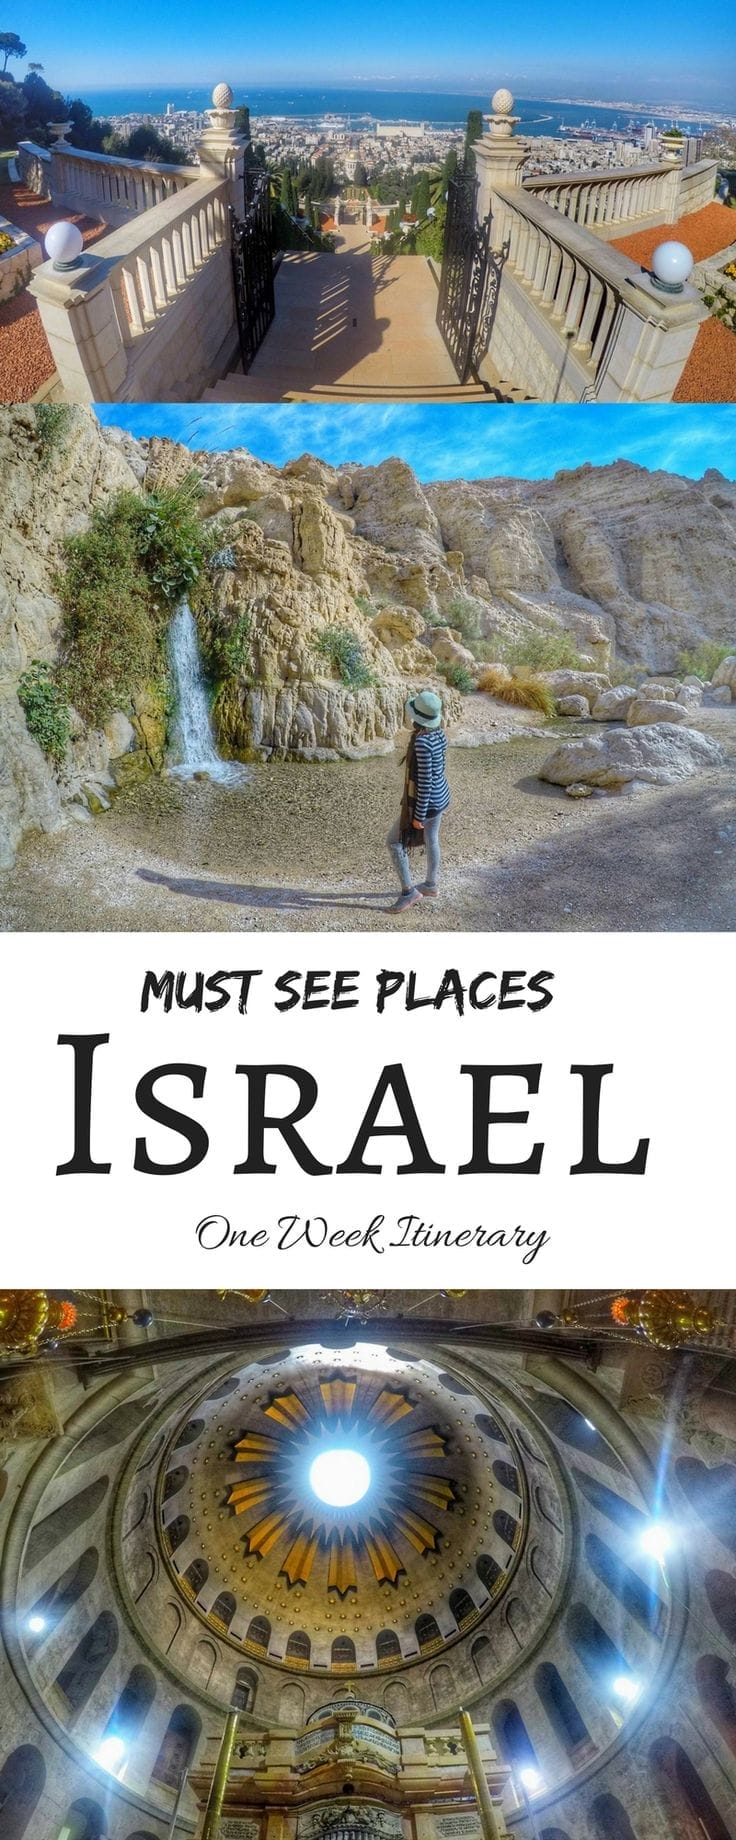 What To See In Israel – 7 Day Itinerary Of Things To Do